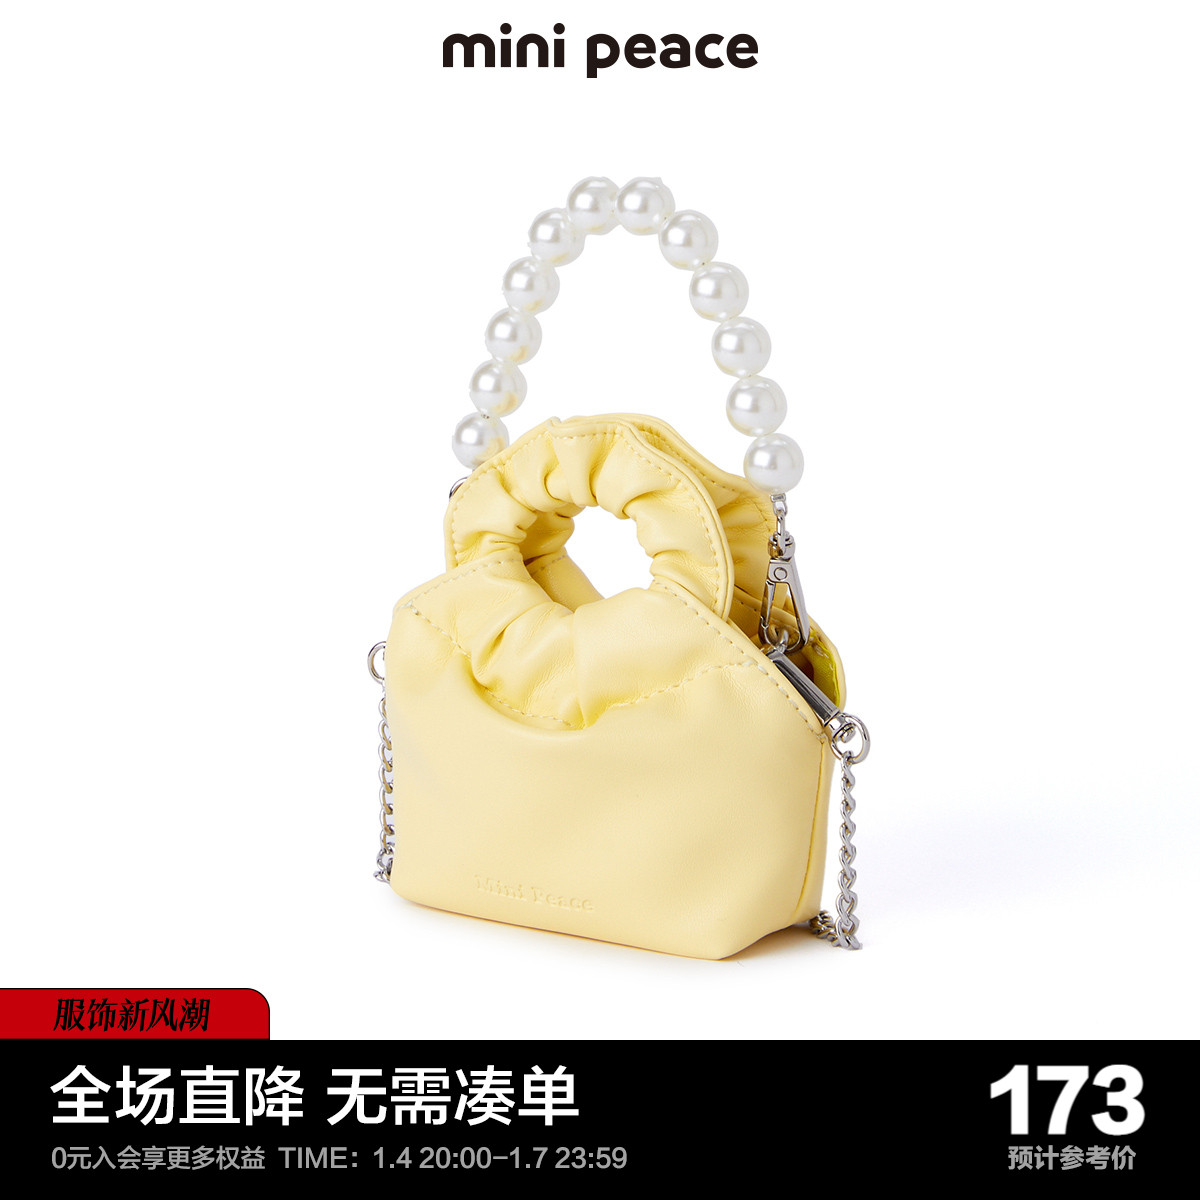 (special cabinet same section) minipeace Taiping bird children's clothing girl bag new yellow pearl chain bag-Taobao